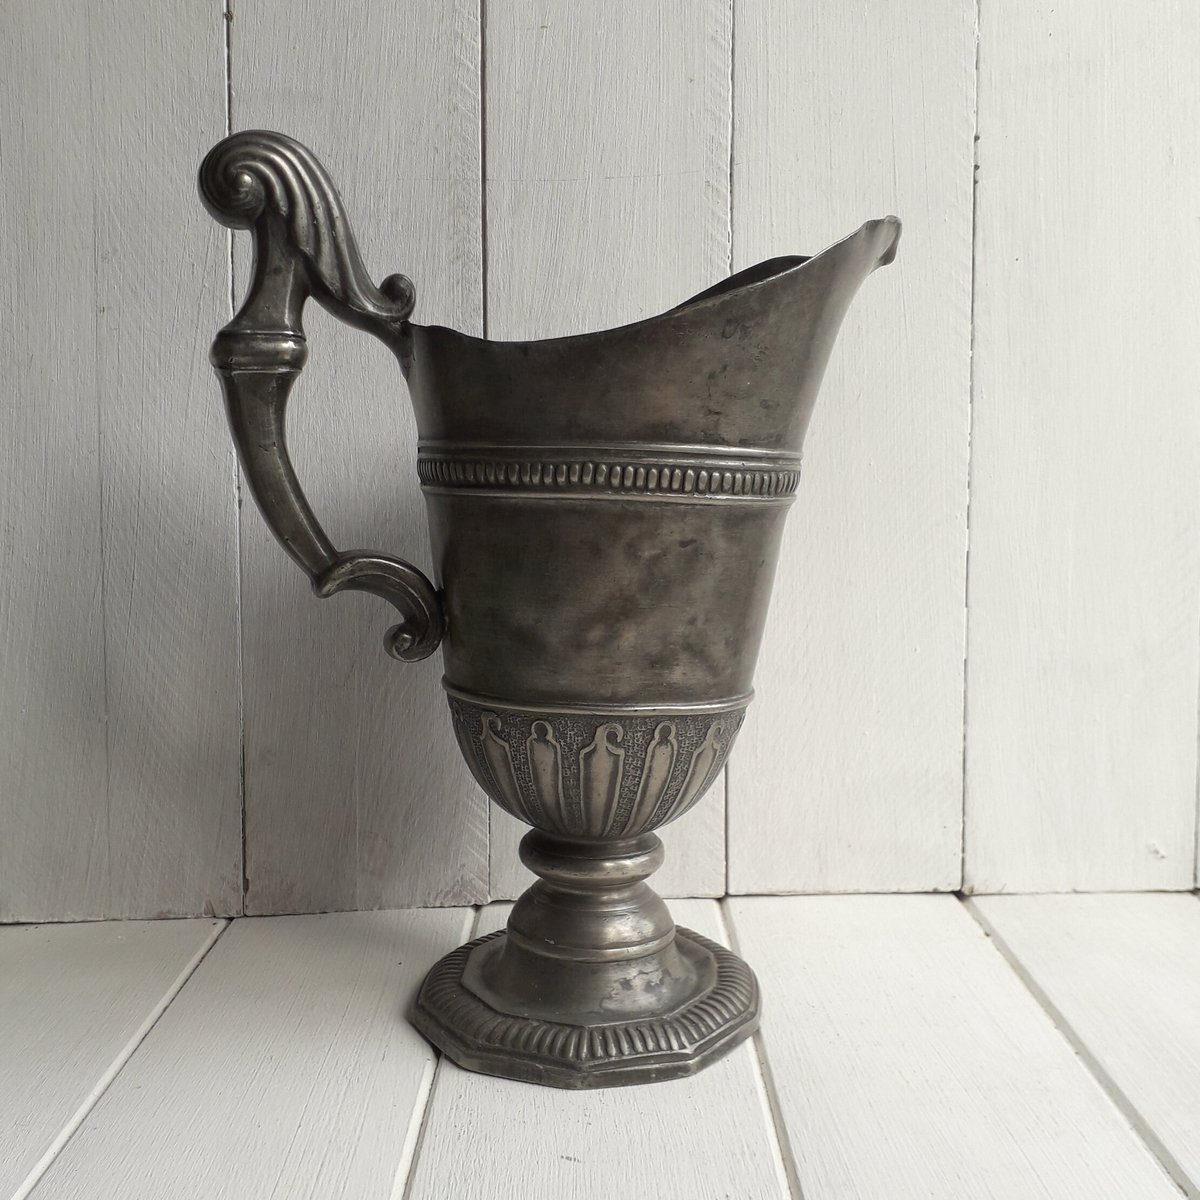 Excited to share the latest addition to my #etsy shop: Large Unique French Antique Decorative Pewter Jug, Decorative Pewter Pitcher etsy.me/3yIX6aq #gray #christmas #frenchantique #pewterjug #vintageflagon #antiquepewterjug #vintagepewterjug #antiqueflagon #fre